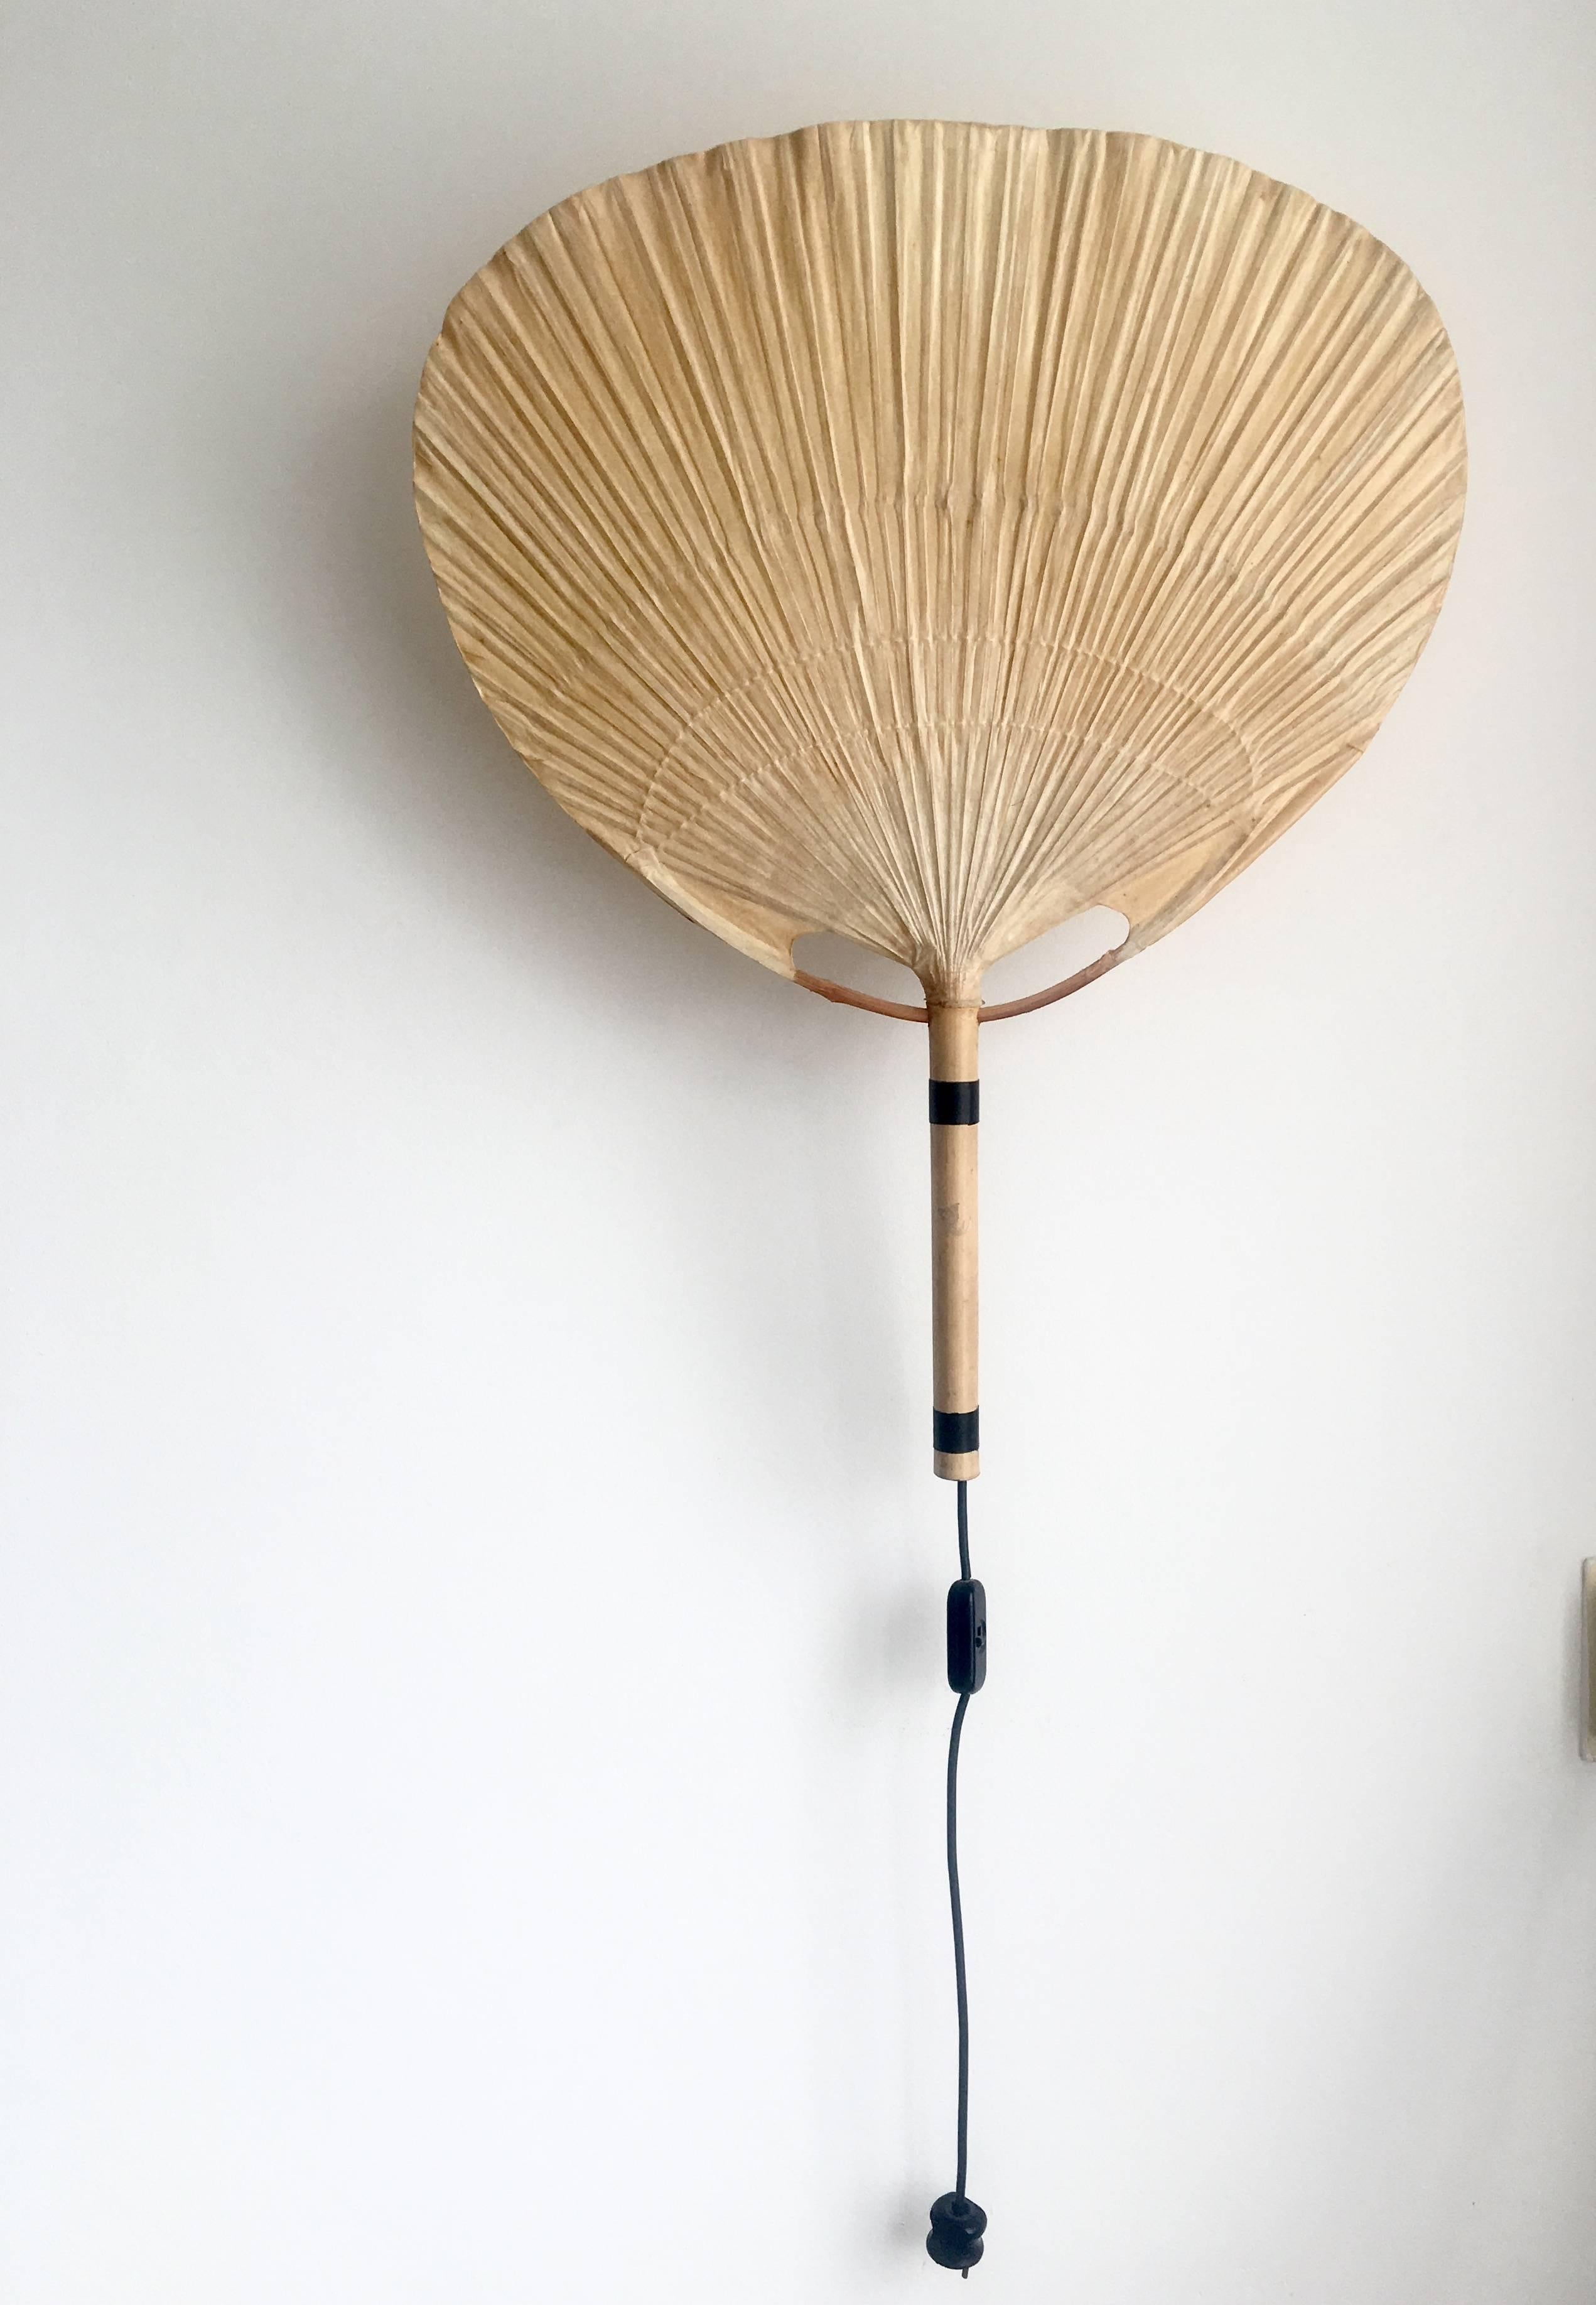 The Uchiwa lamp was designed by Ingo Maurer, in Germany, 1973. From the start, Maurer's interest in paper for lampshades was linked with his interest in Japan. 

The lamp gives an amazing warm light when lit. It's made from bamboo with a rice